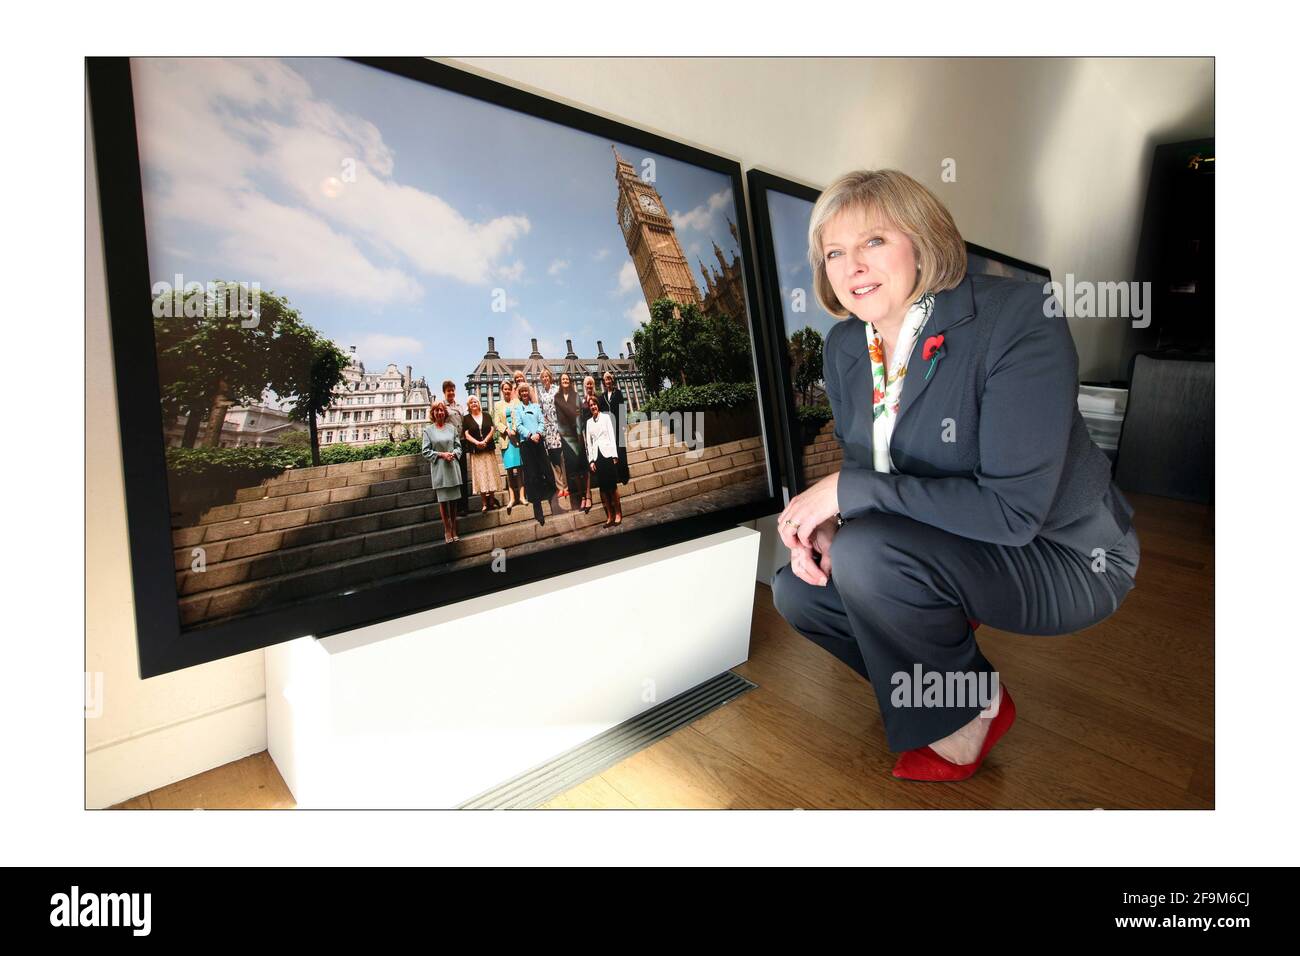 Four photographic images, of 104 of the 125 women MPs in Westminster were launched at the Portrait Gallery in London. The images shot by Kieran Doherty are to mark 90 years since women were first given the vote.Theresa May MP views one of the images. photograph by David Sandison The Independent Stock Photo